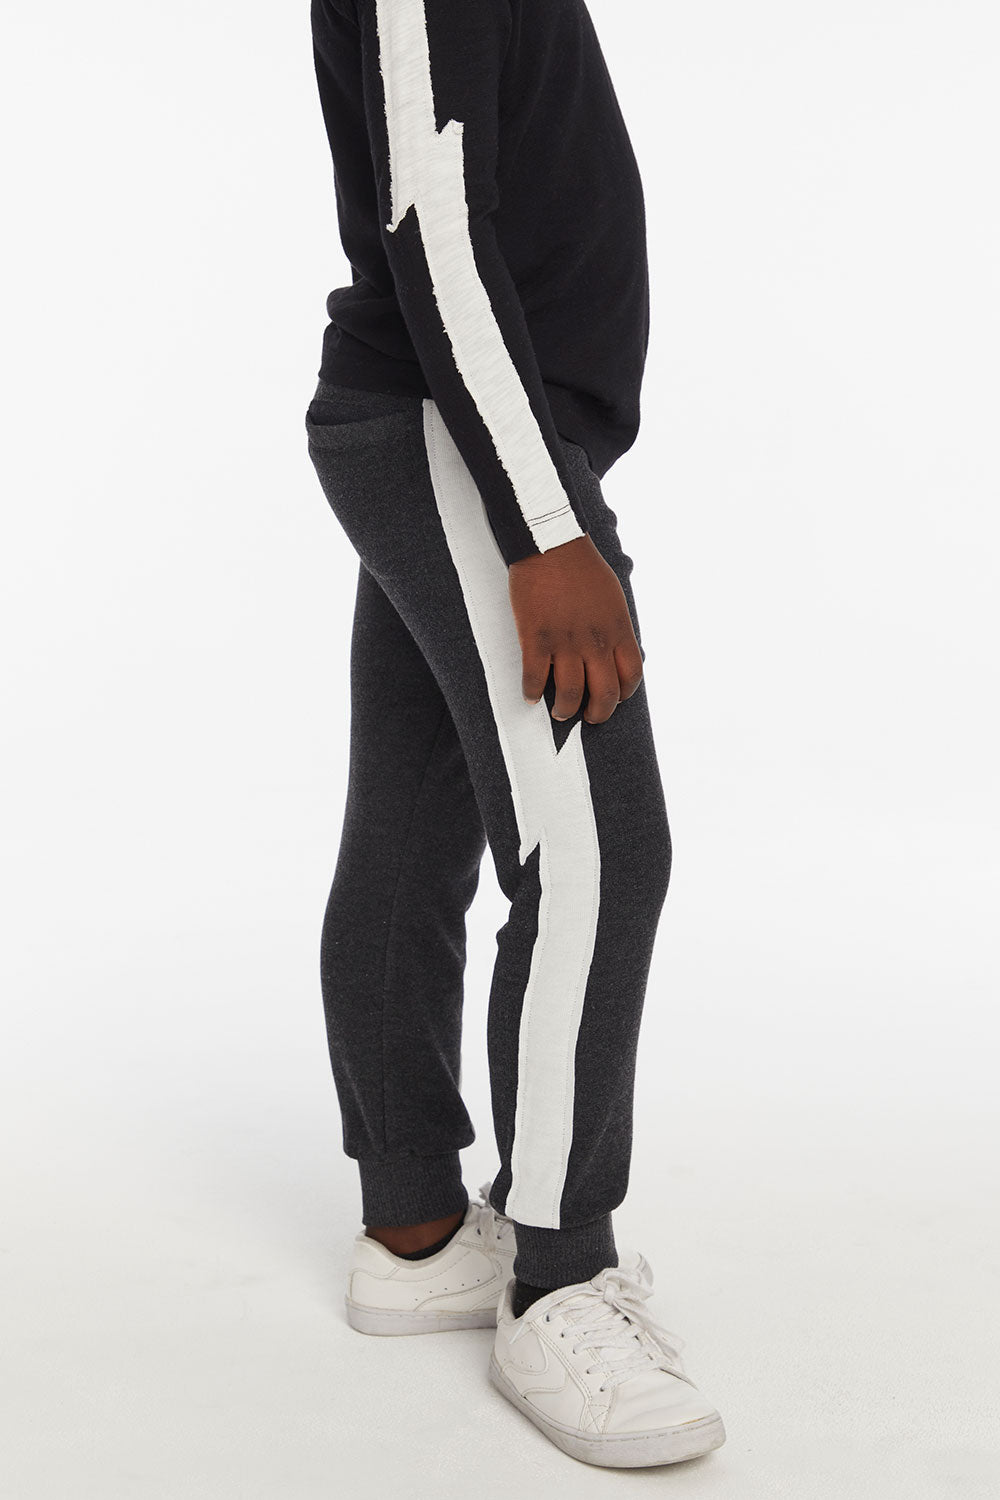 Bolt Licorice Joggers Boys chaserbrand